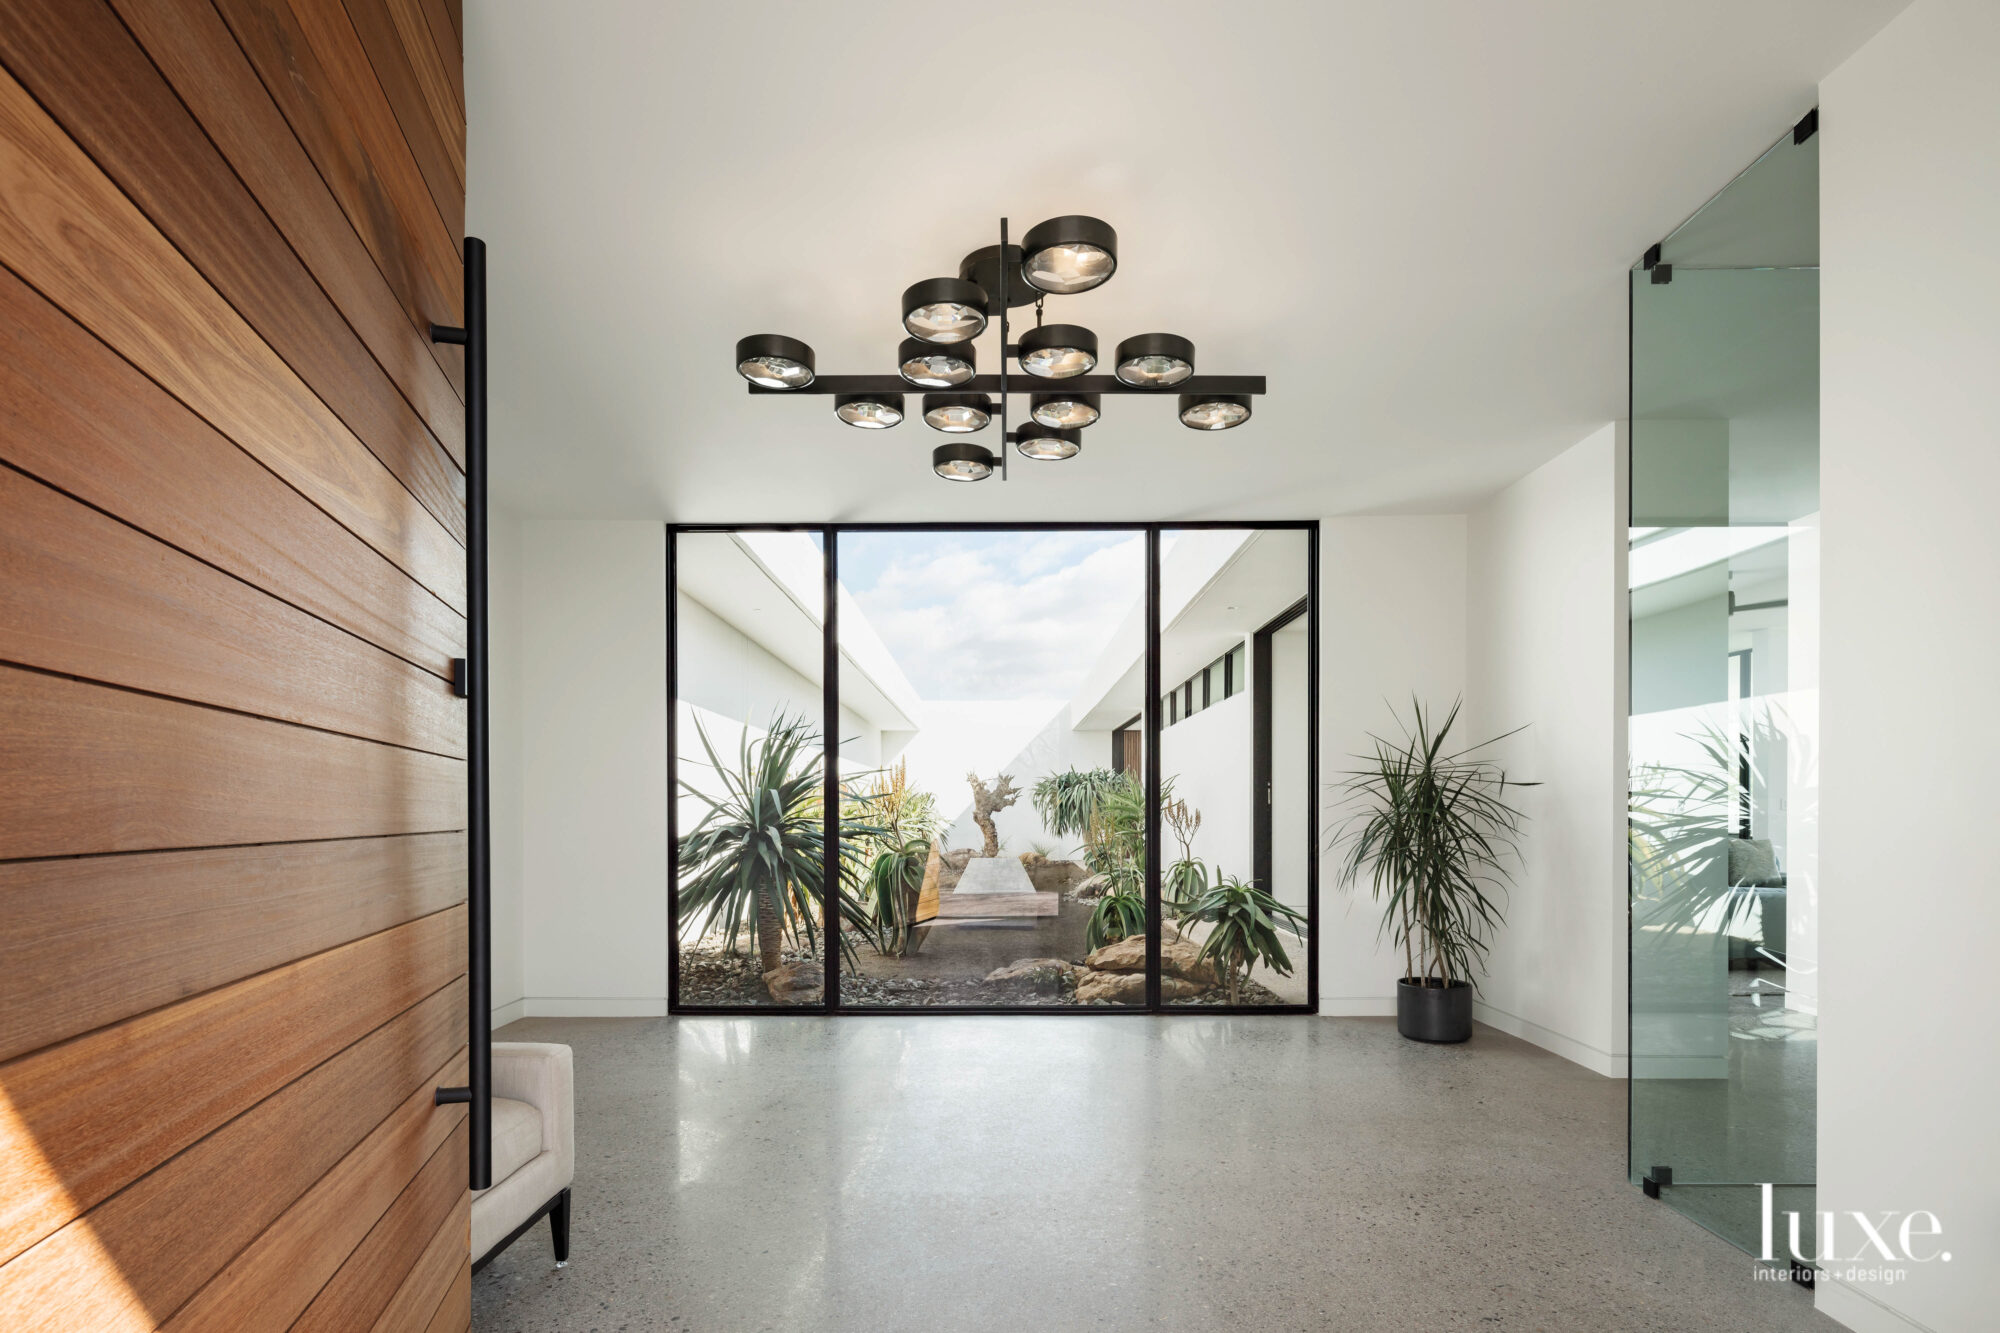 The minimalist entryway with concrete floors that looks into a courtyard.